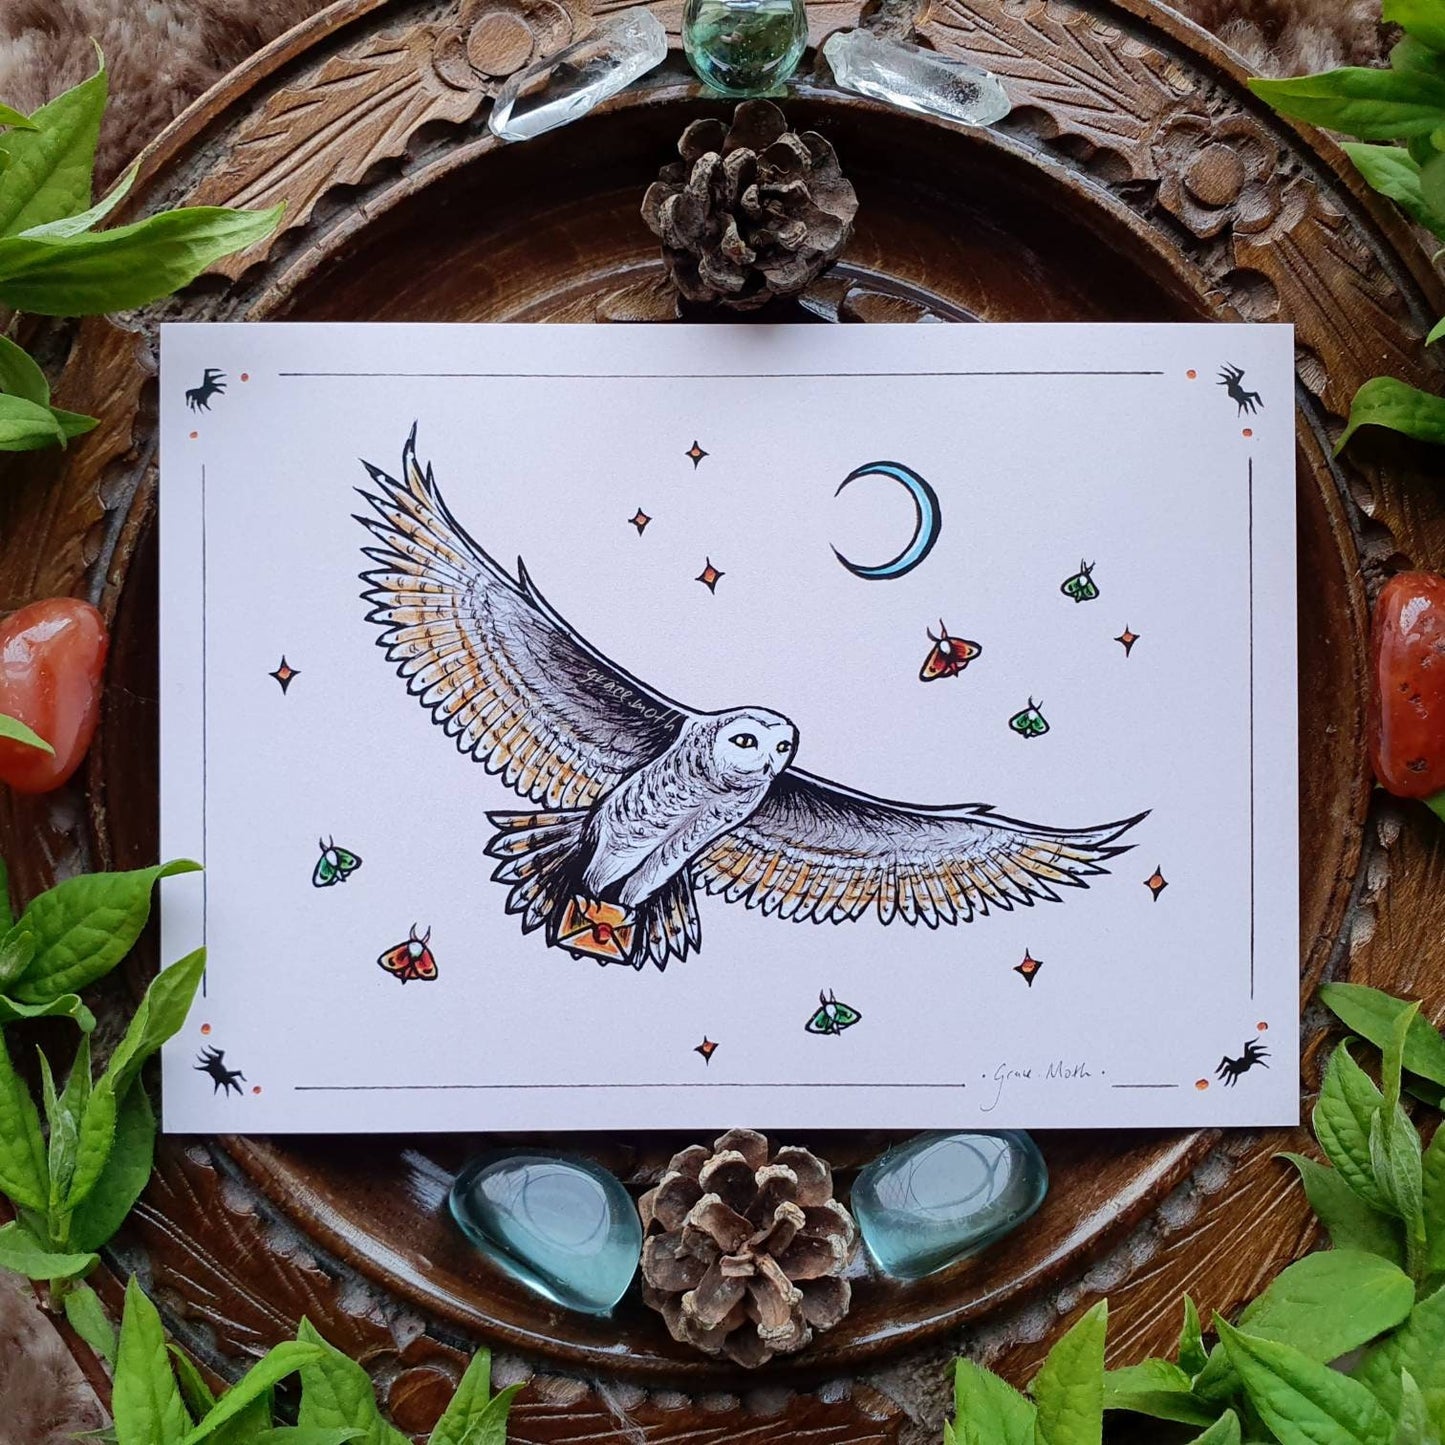 Barn Owl Delivery - A6 print by Grace Moth - 5.8 x 4.1